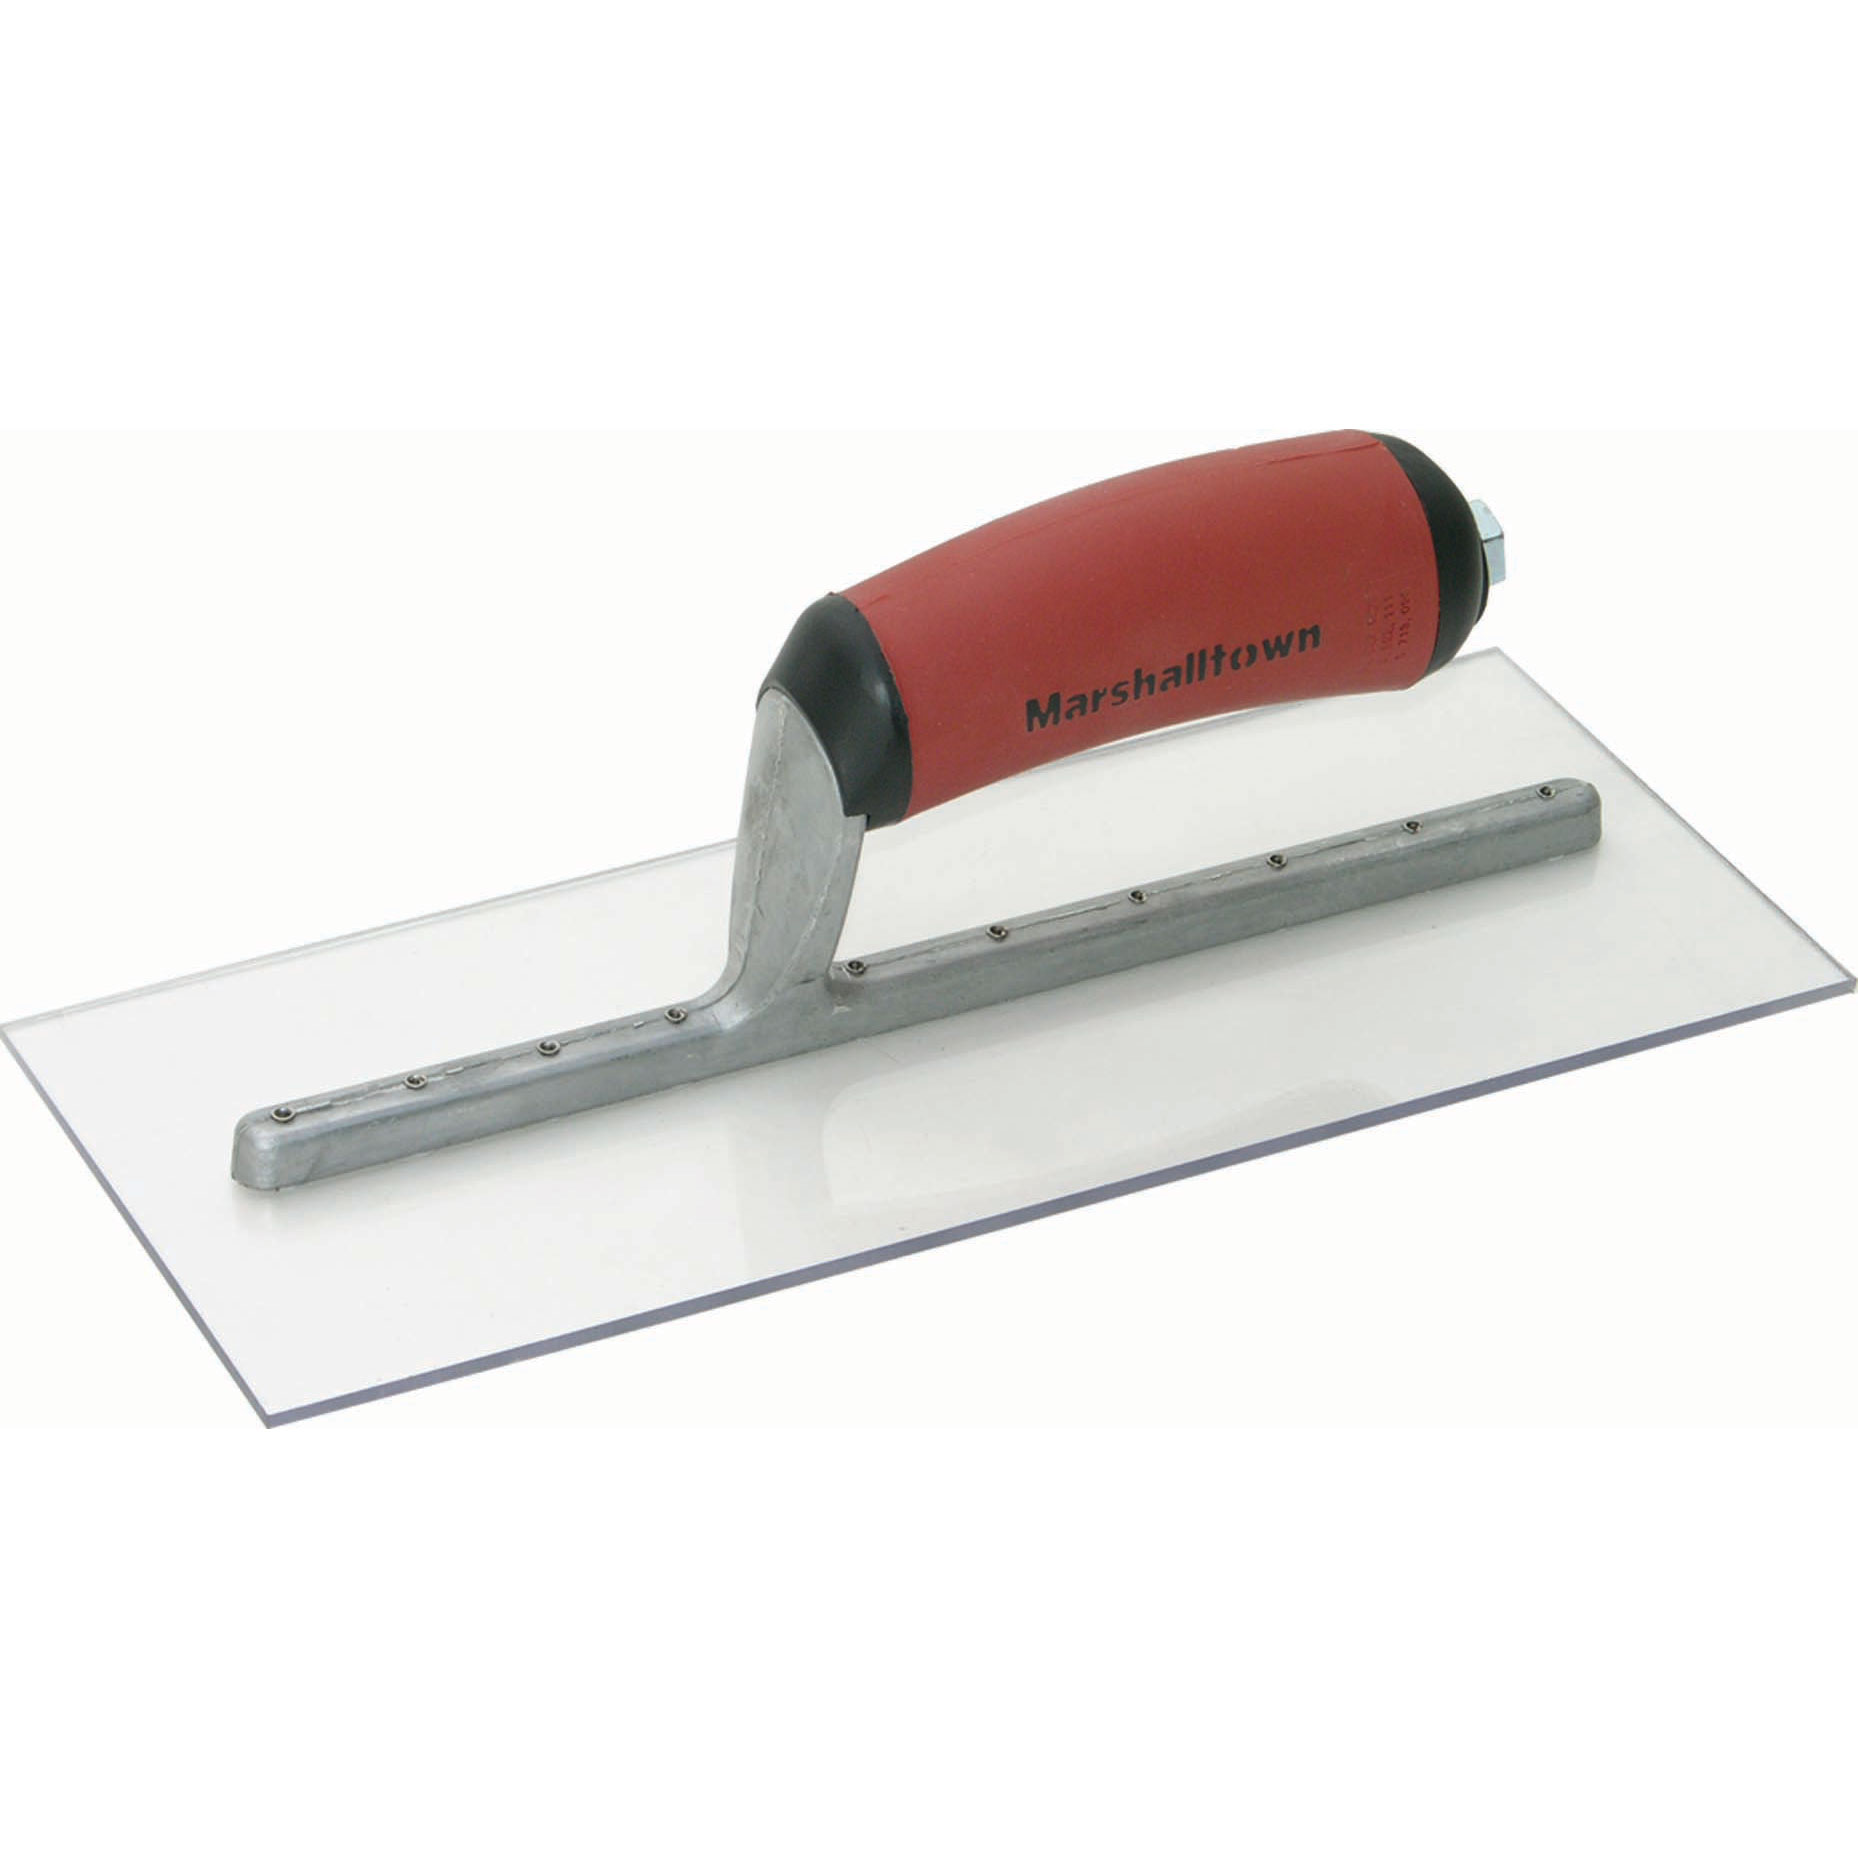 Marshalltown PMXS1D 11in x 4-1/2in Plastic Finishing Trowel with DuraSoft Handle PMXS1D